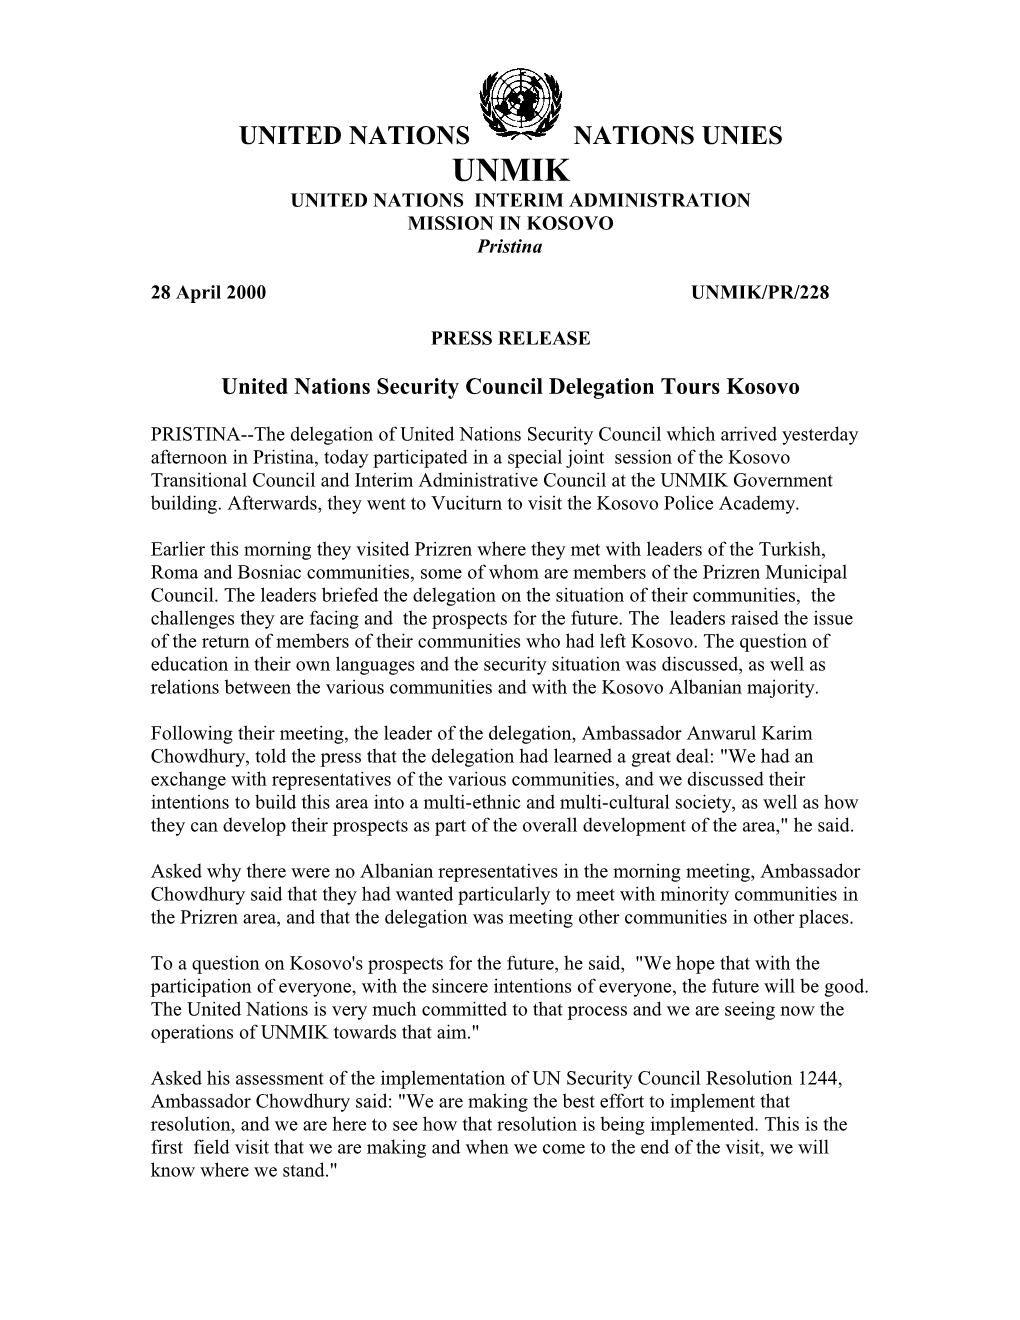 28/04/2000 - United Nations Security Council Delegation Tours Kosovo